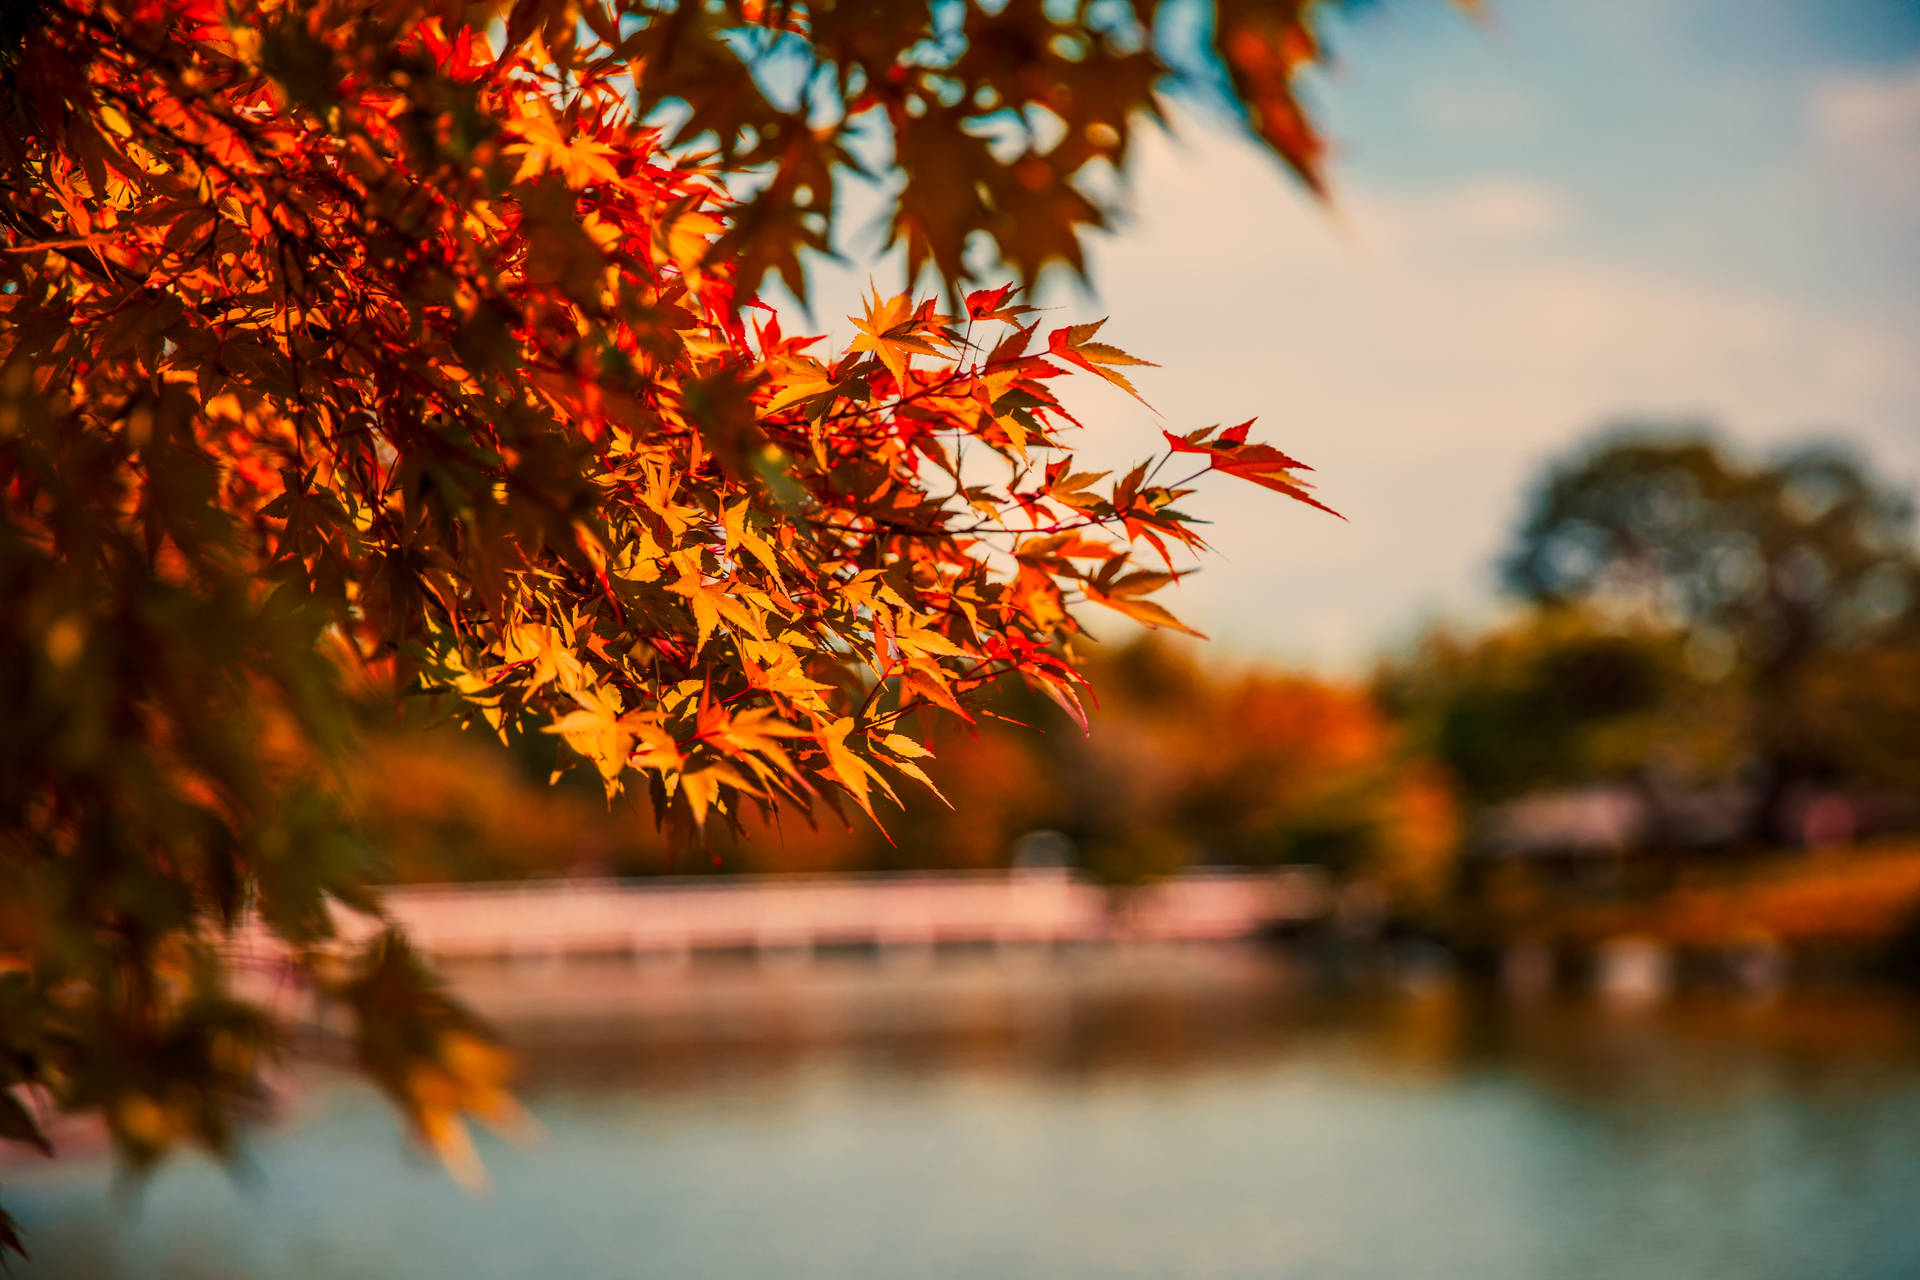 Autumn Maple Leaves Close-Up wallpaper.